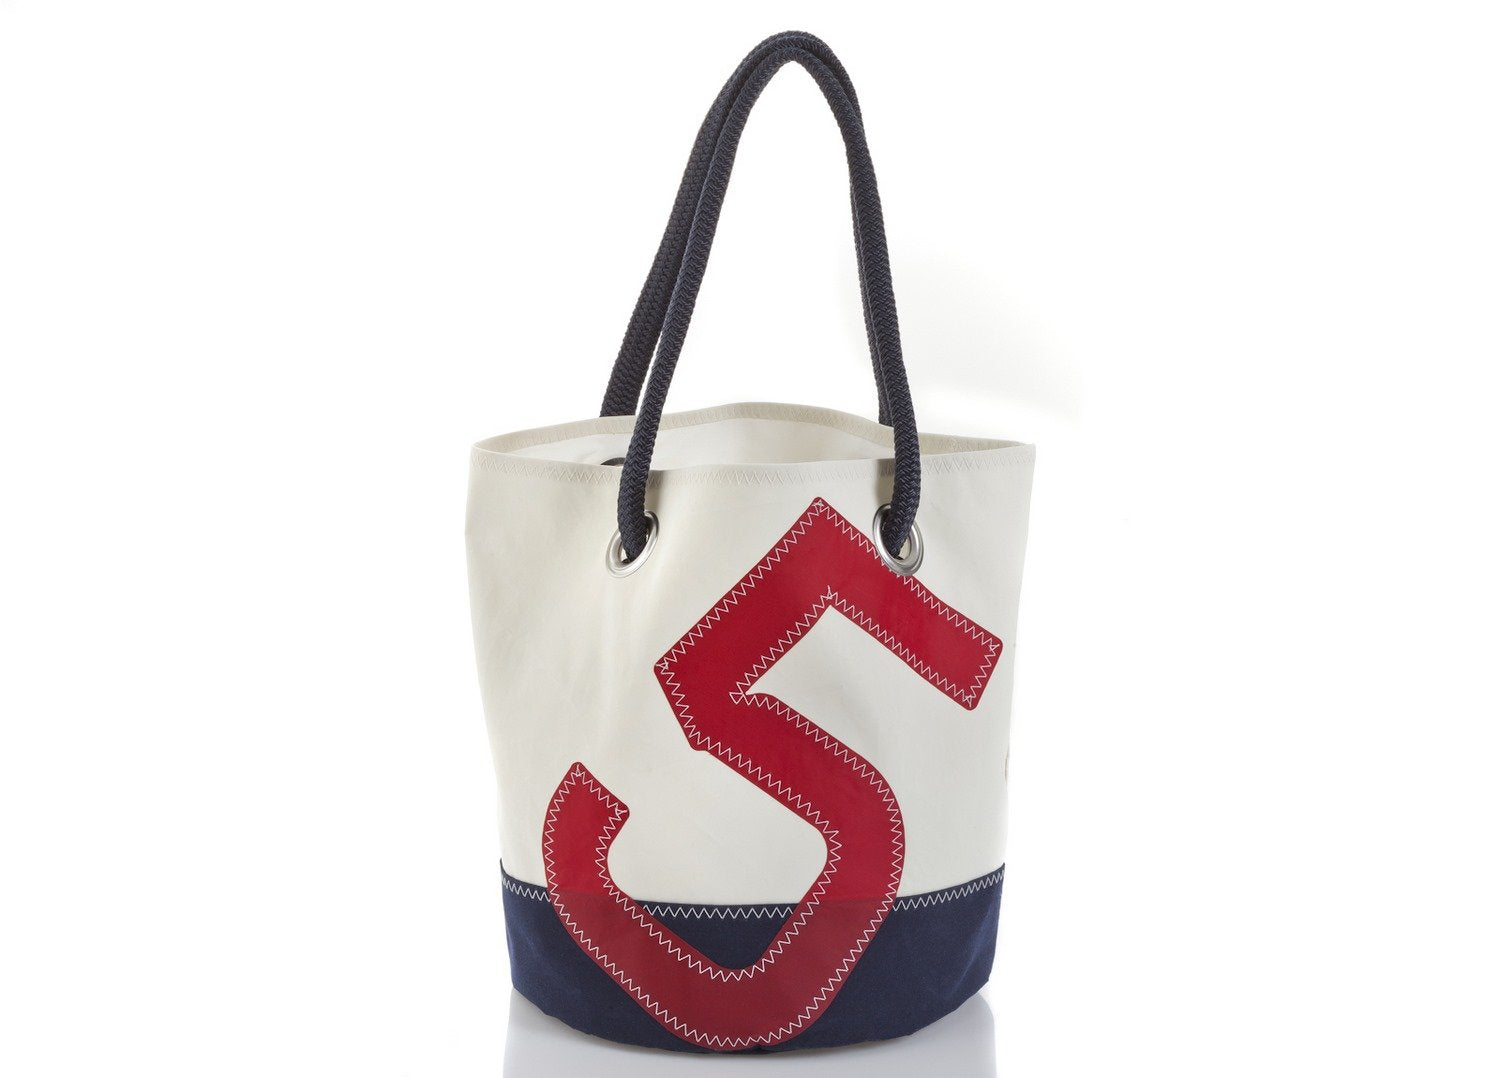 Sports Bag "Diego" in Recycled Sail